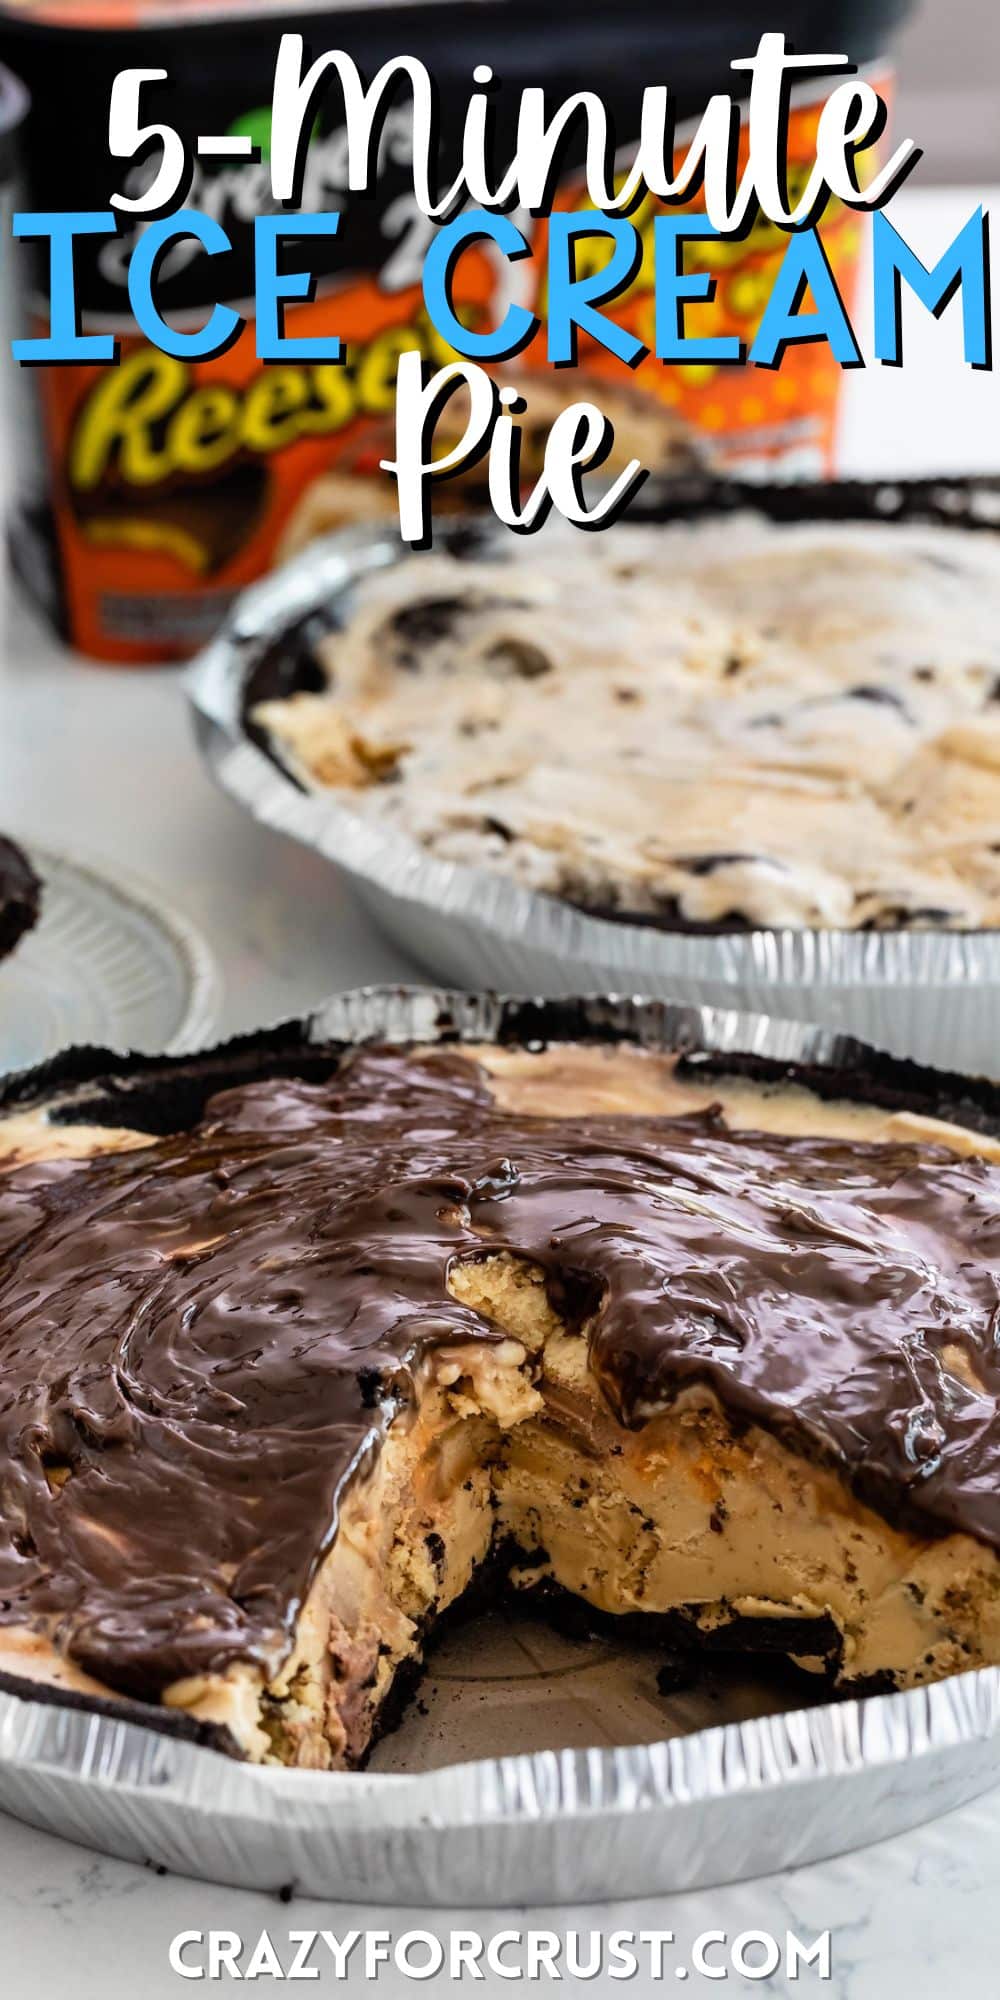 ice cream pie with chocolate on top in a metal pan with words on the image.